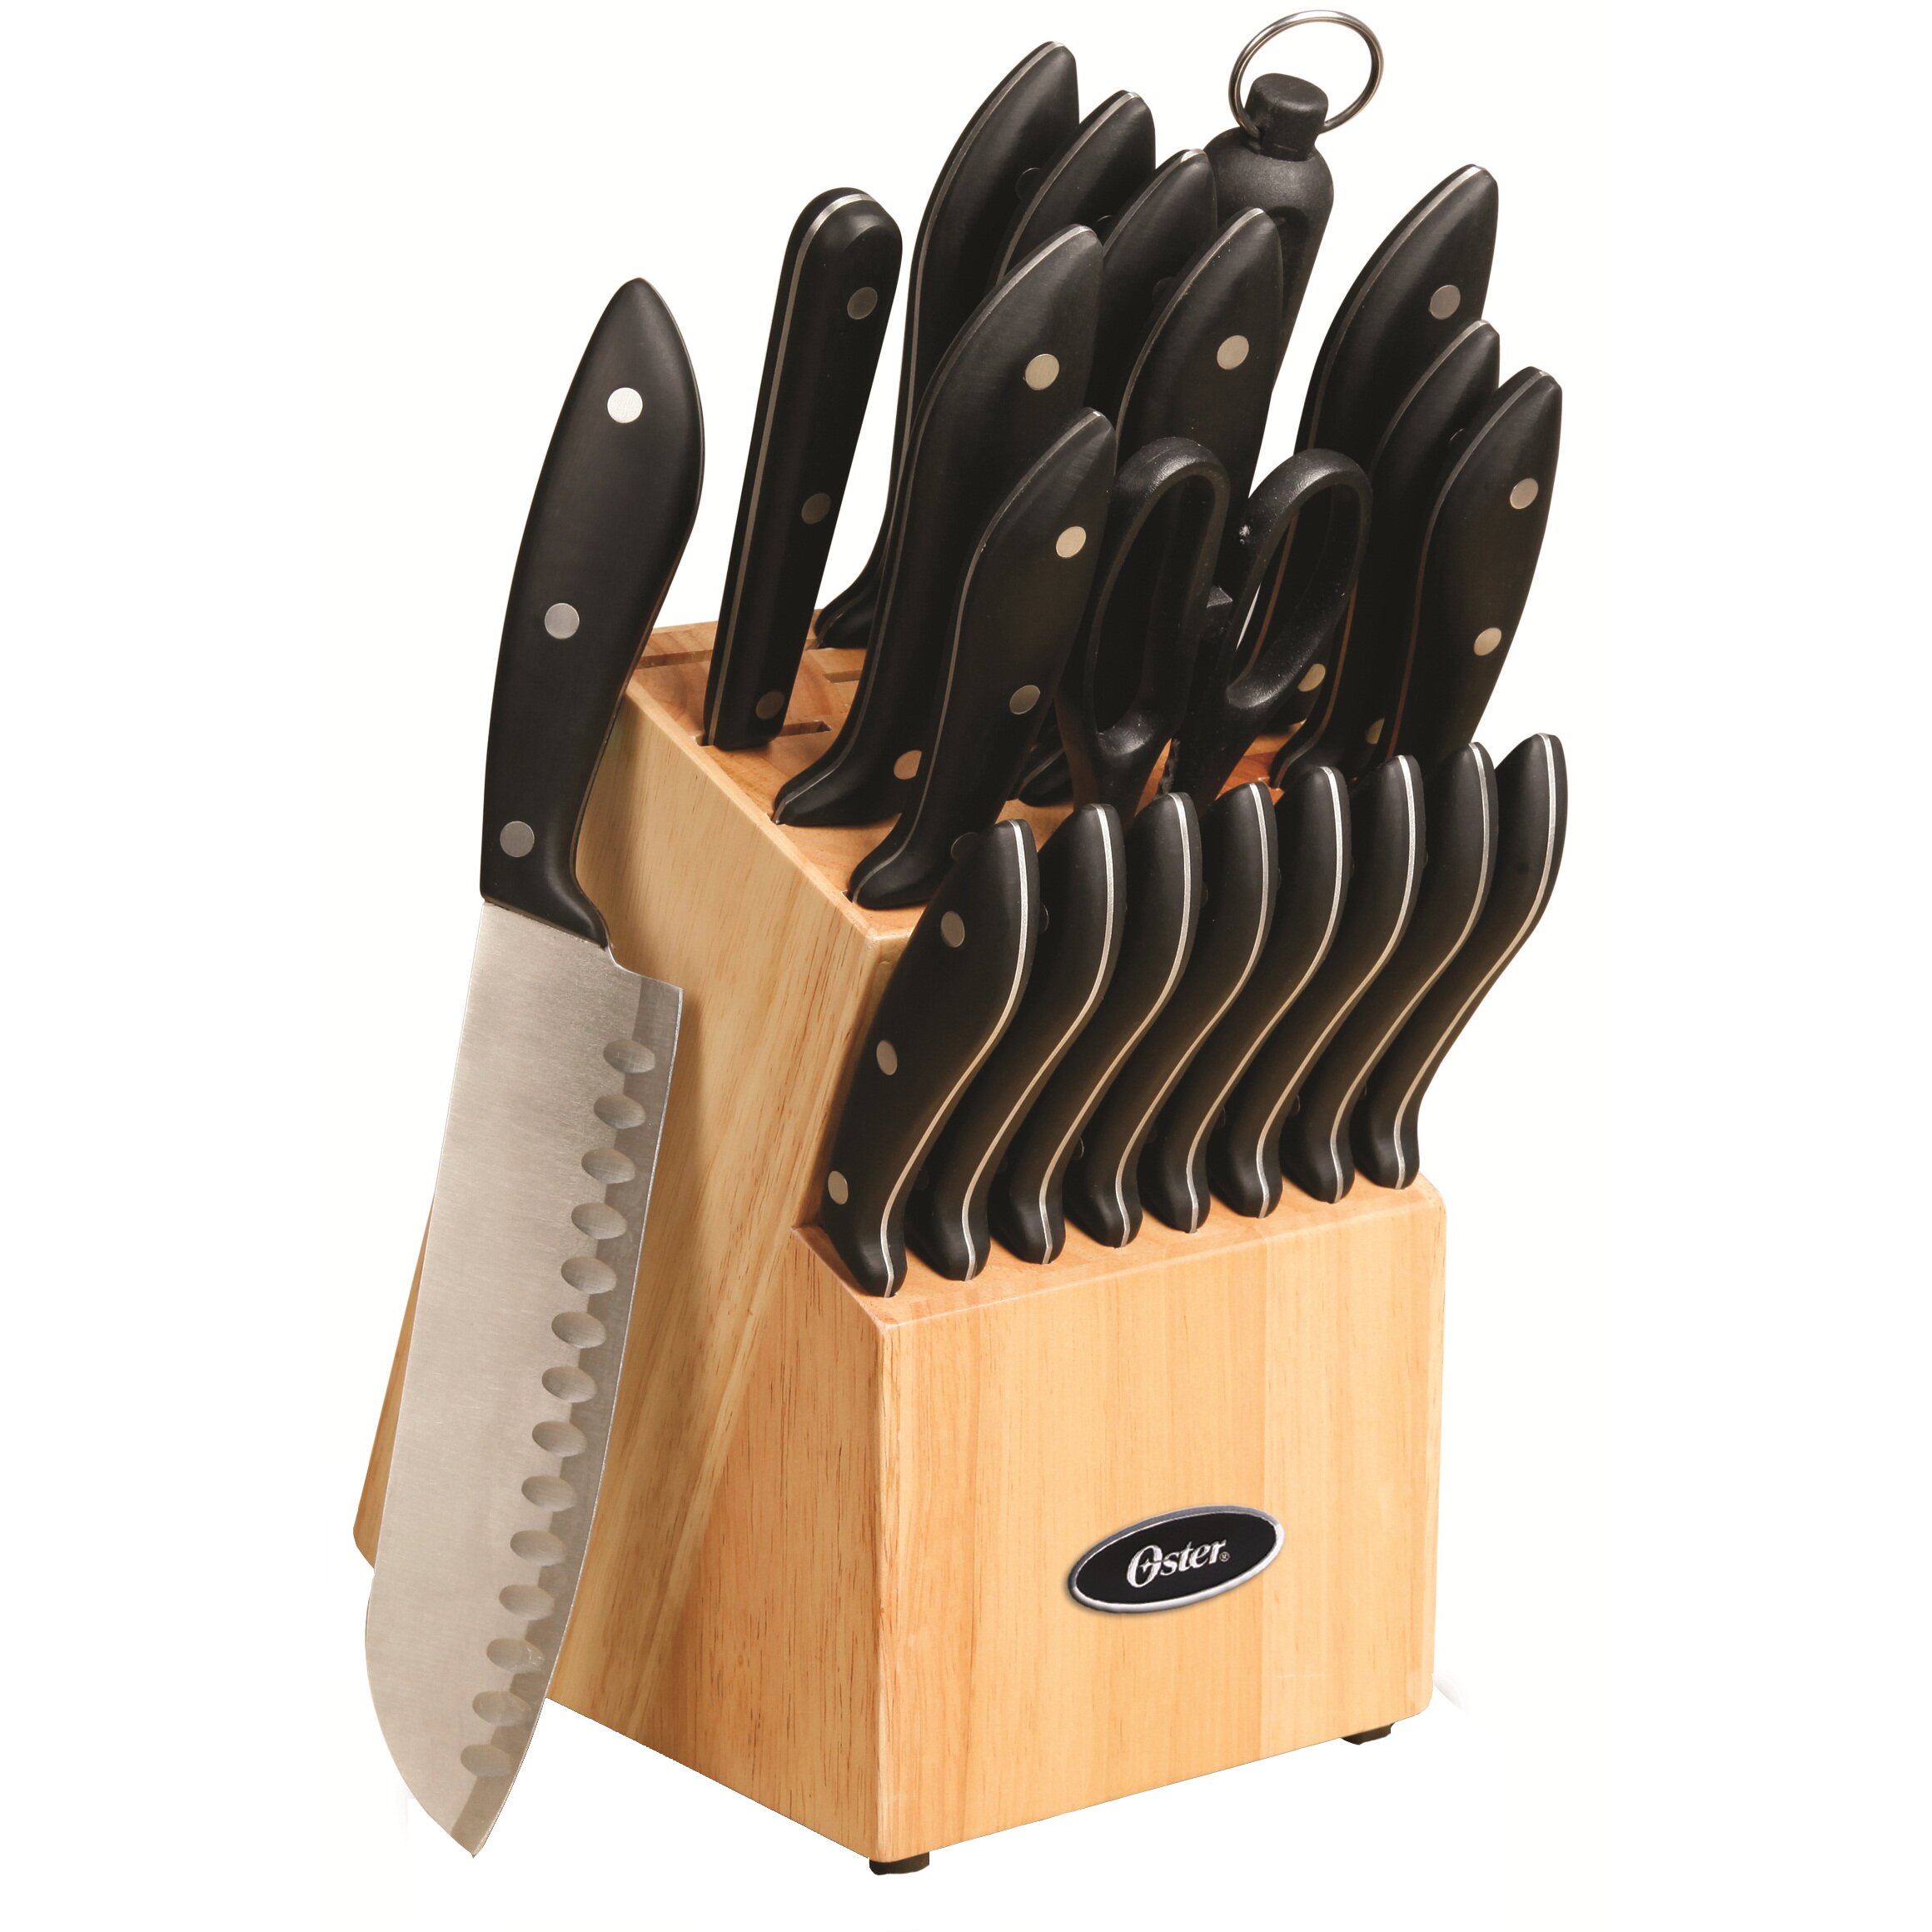 What do reviews say about the Ronco knife block?